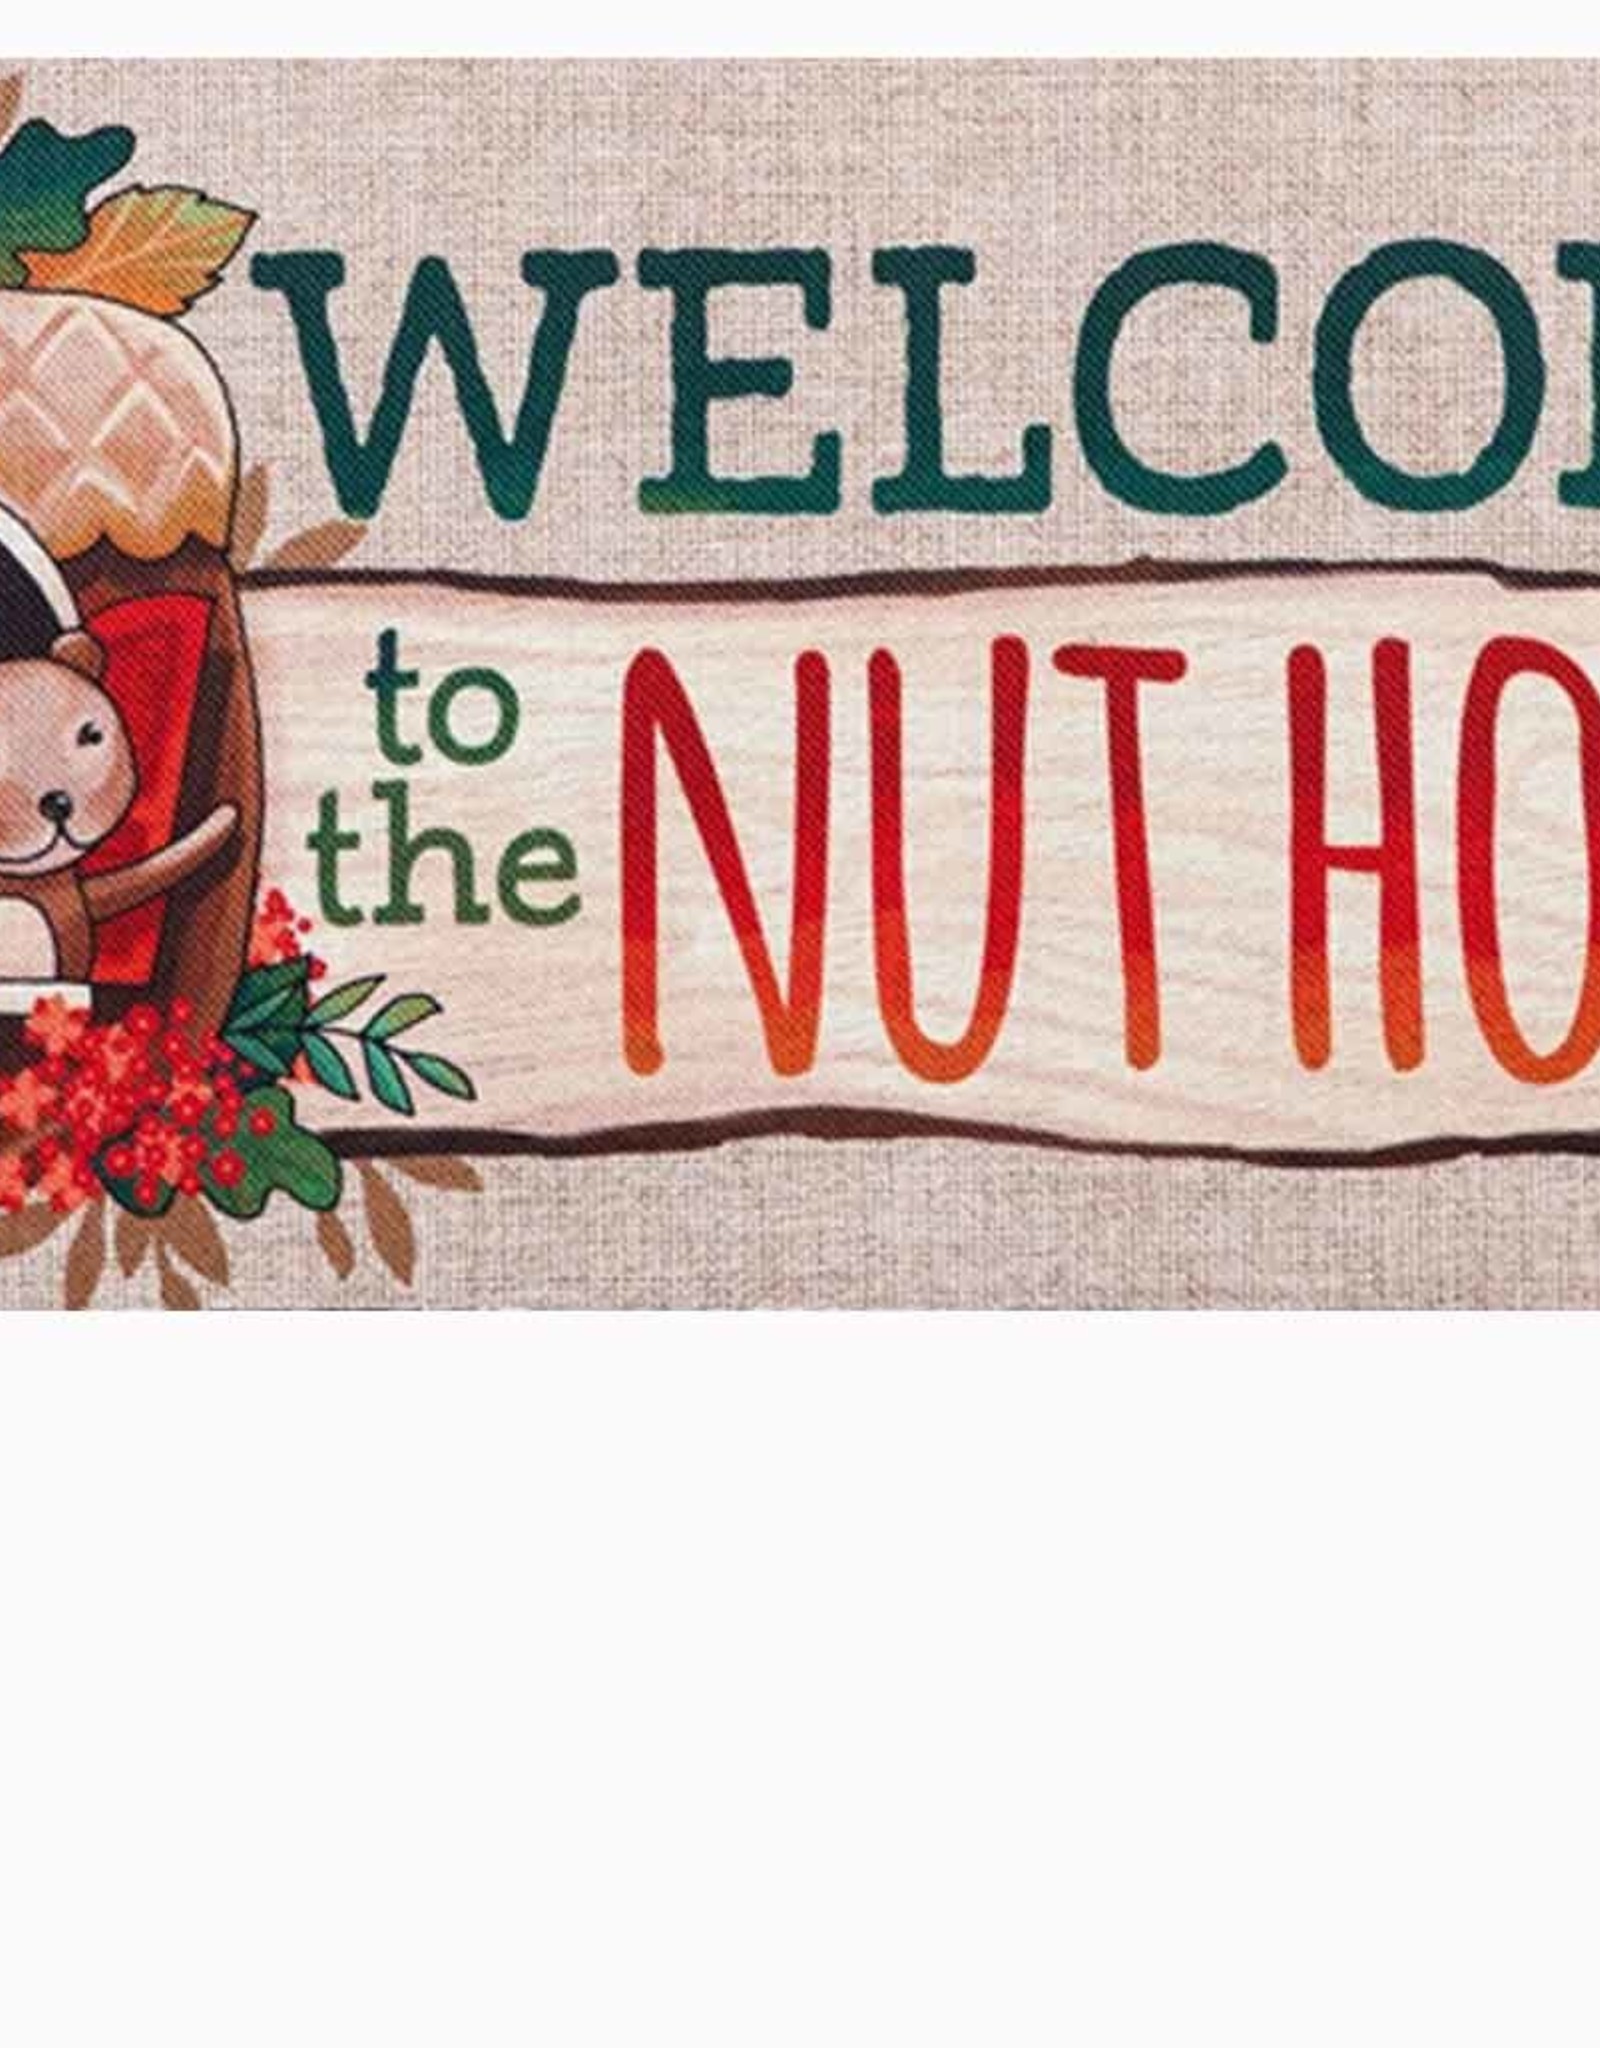 Welcome to the Nut House Sassafras Switch Mat